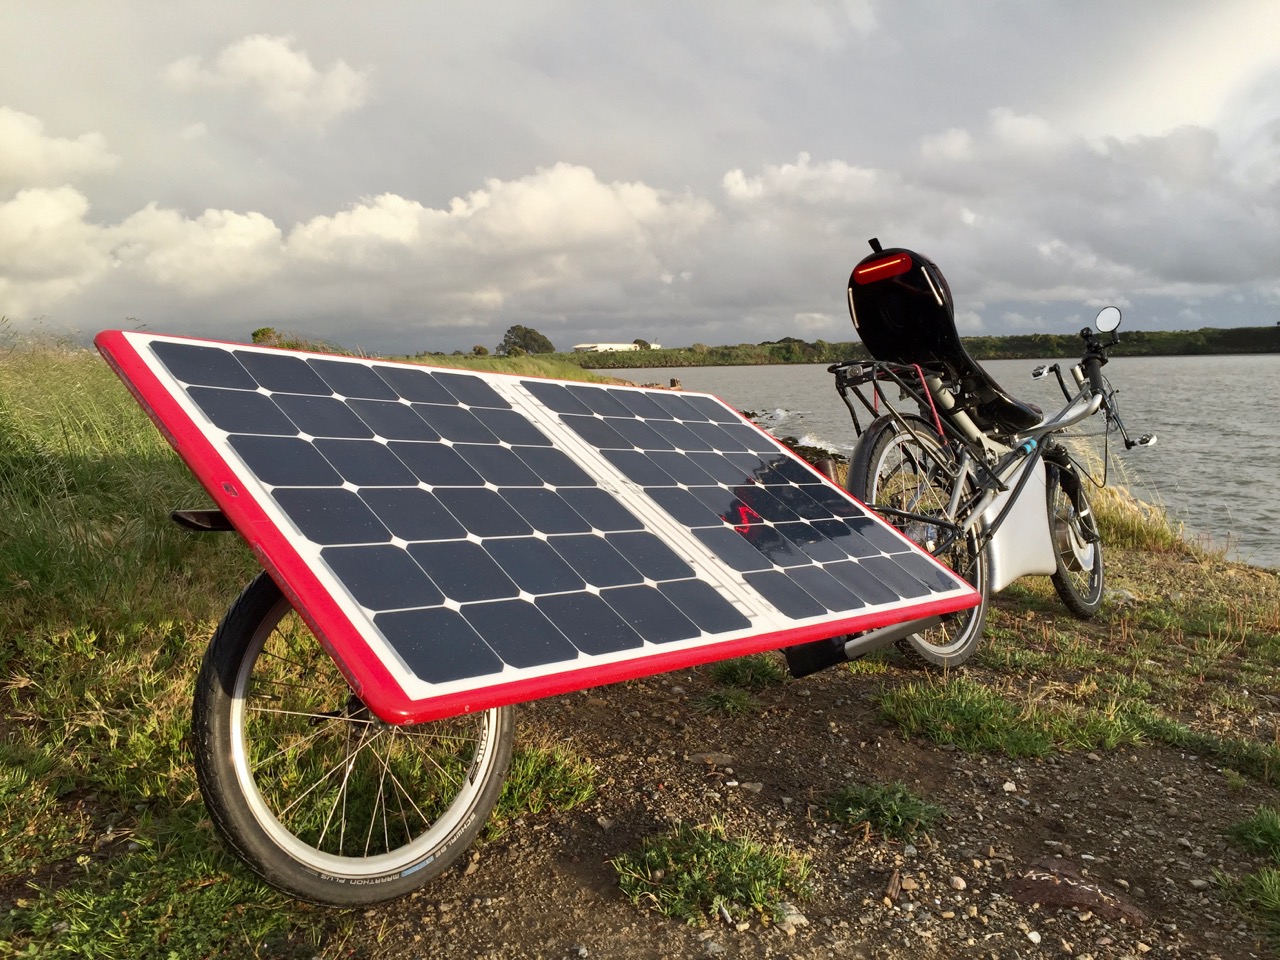 solarEbike: Solar Powered Electric Bicycle